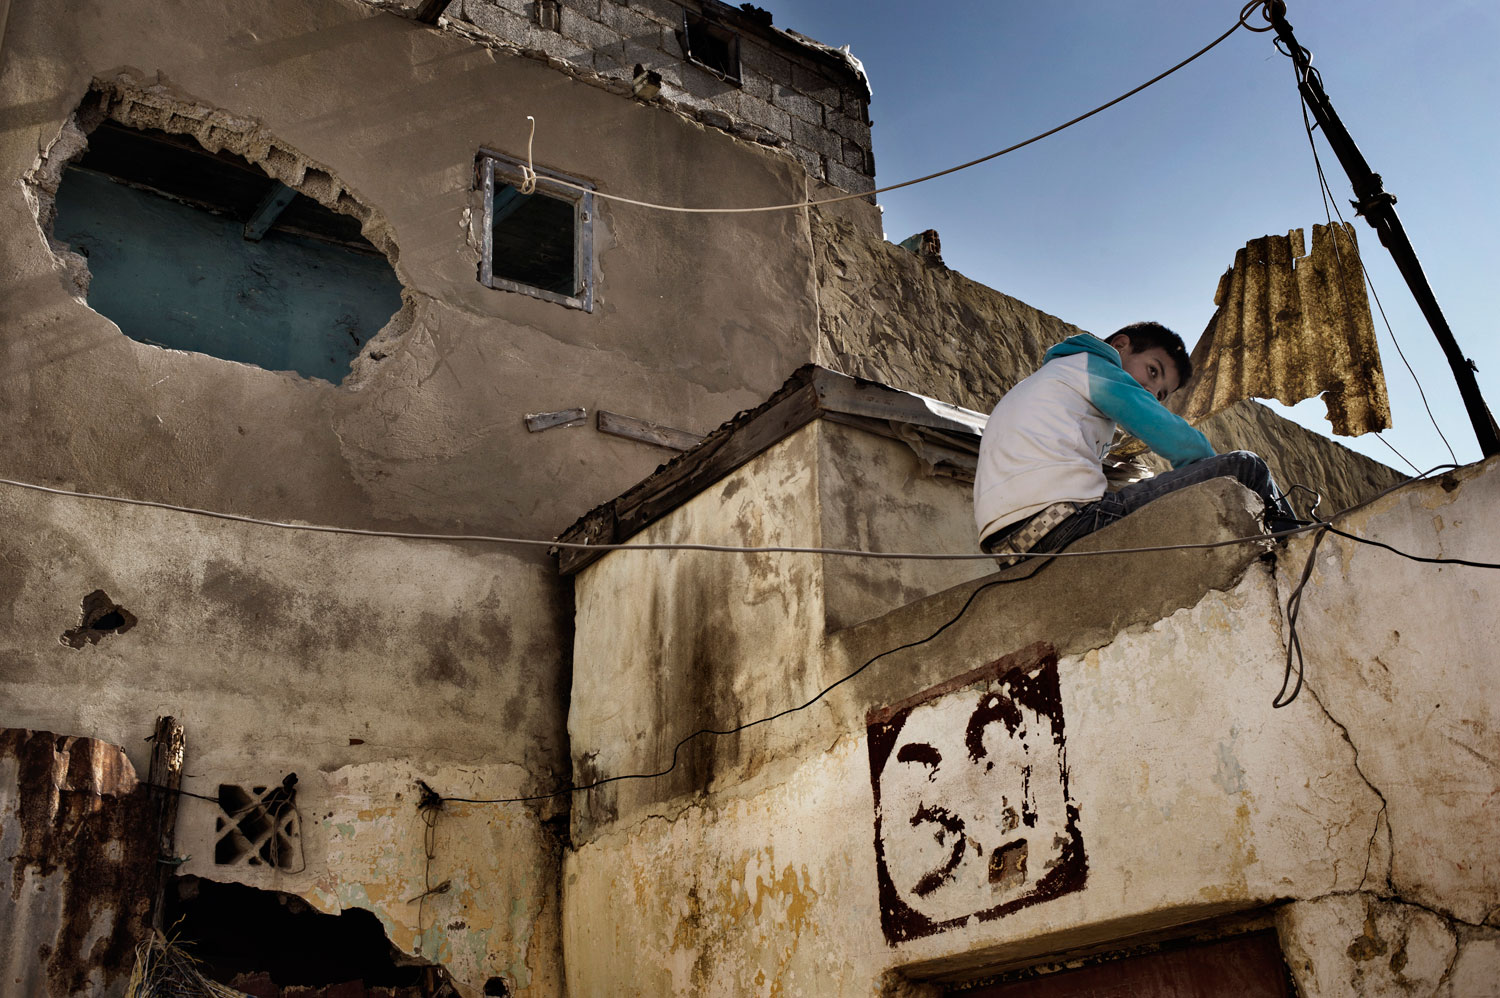 March 2012. A slum known as the Village of the Ball, Douar Elkora in Rabat, Morocco.